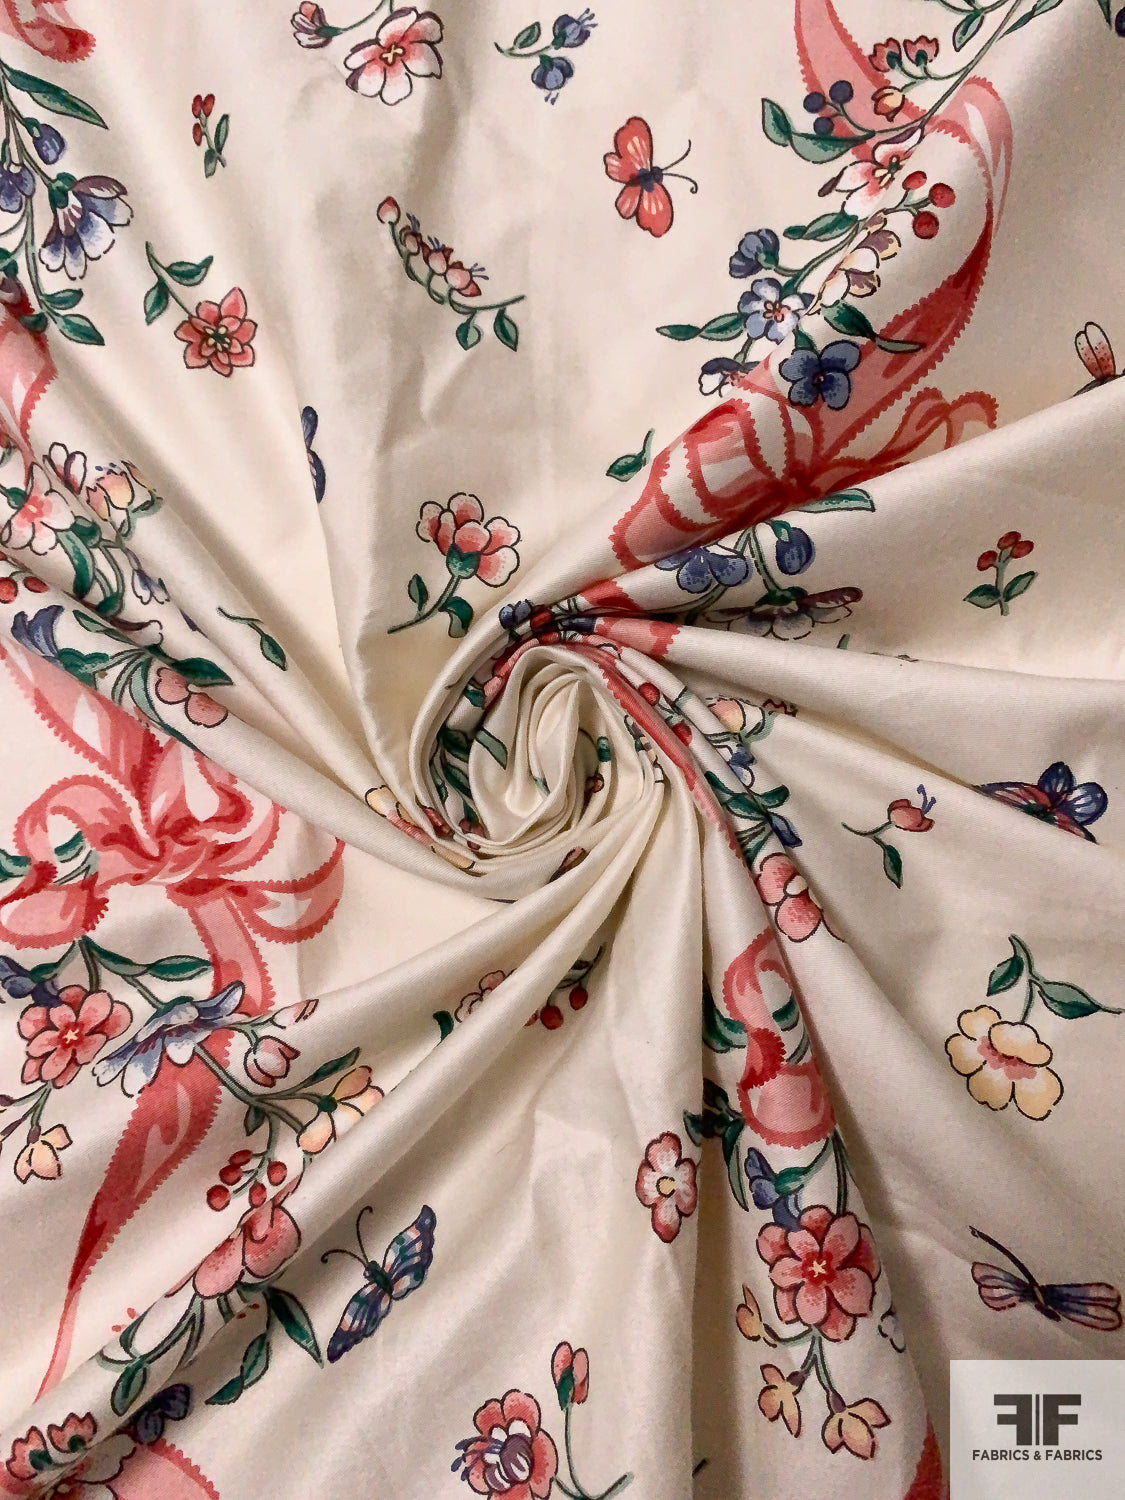 Trailing Floral Ribbon Printed Fine Cotton Twill - Light Biege / Dusty Coral / Green / Soft Blue